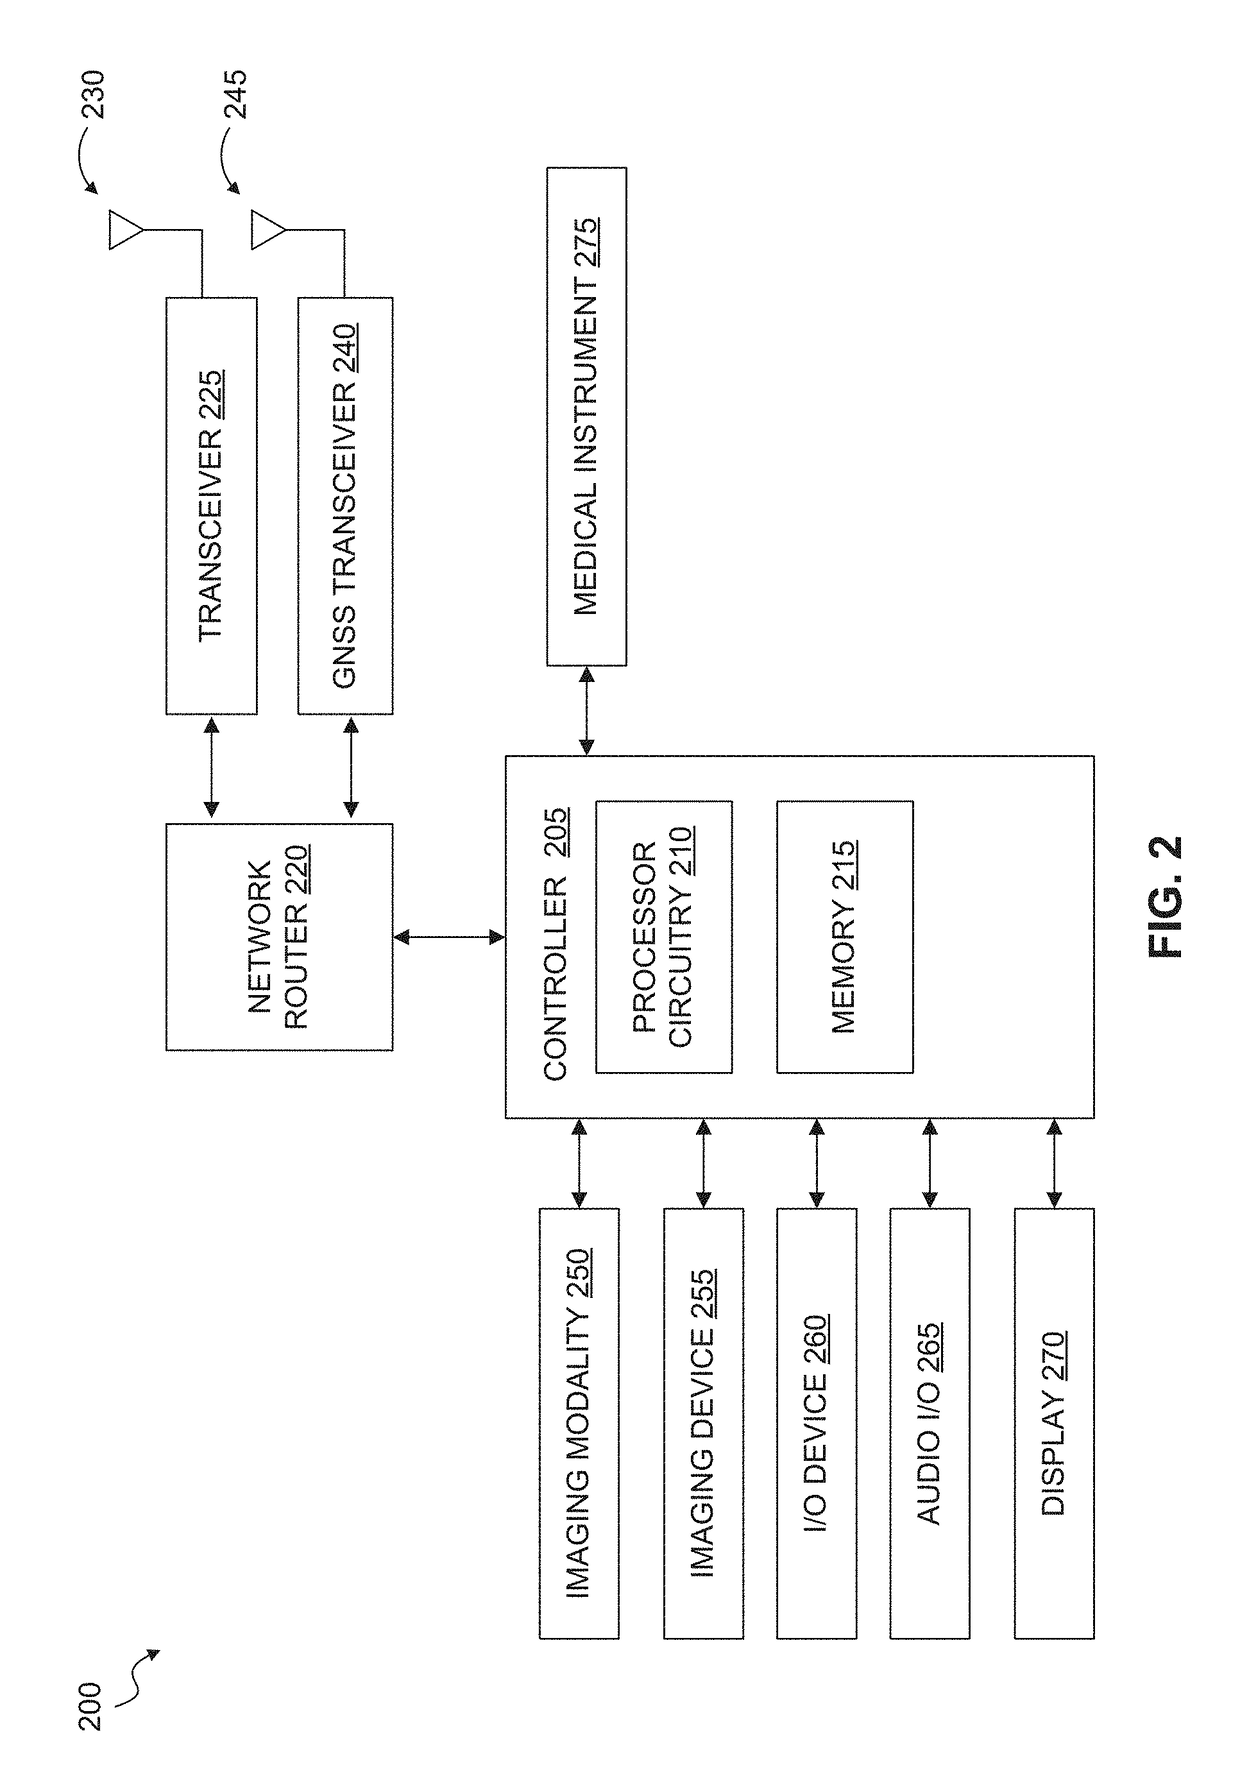 Mobile medicine communication platform and methods and uses thereof